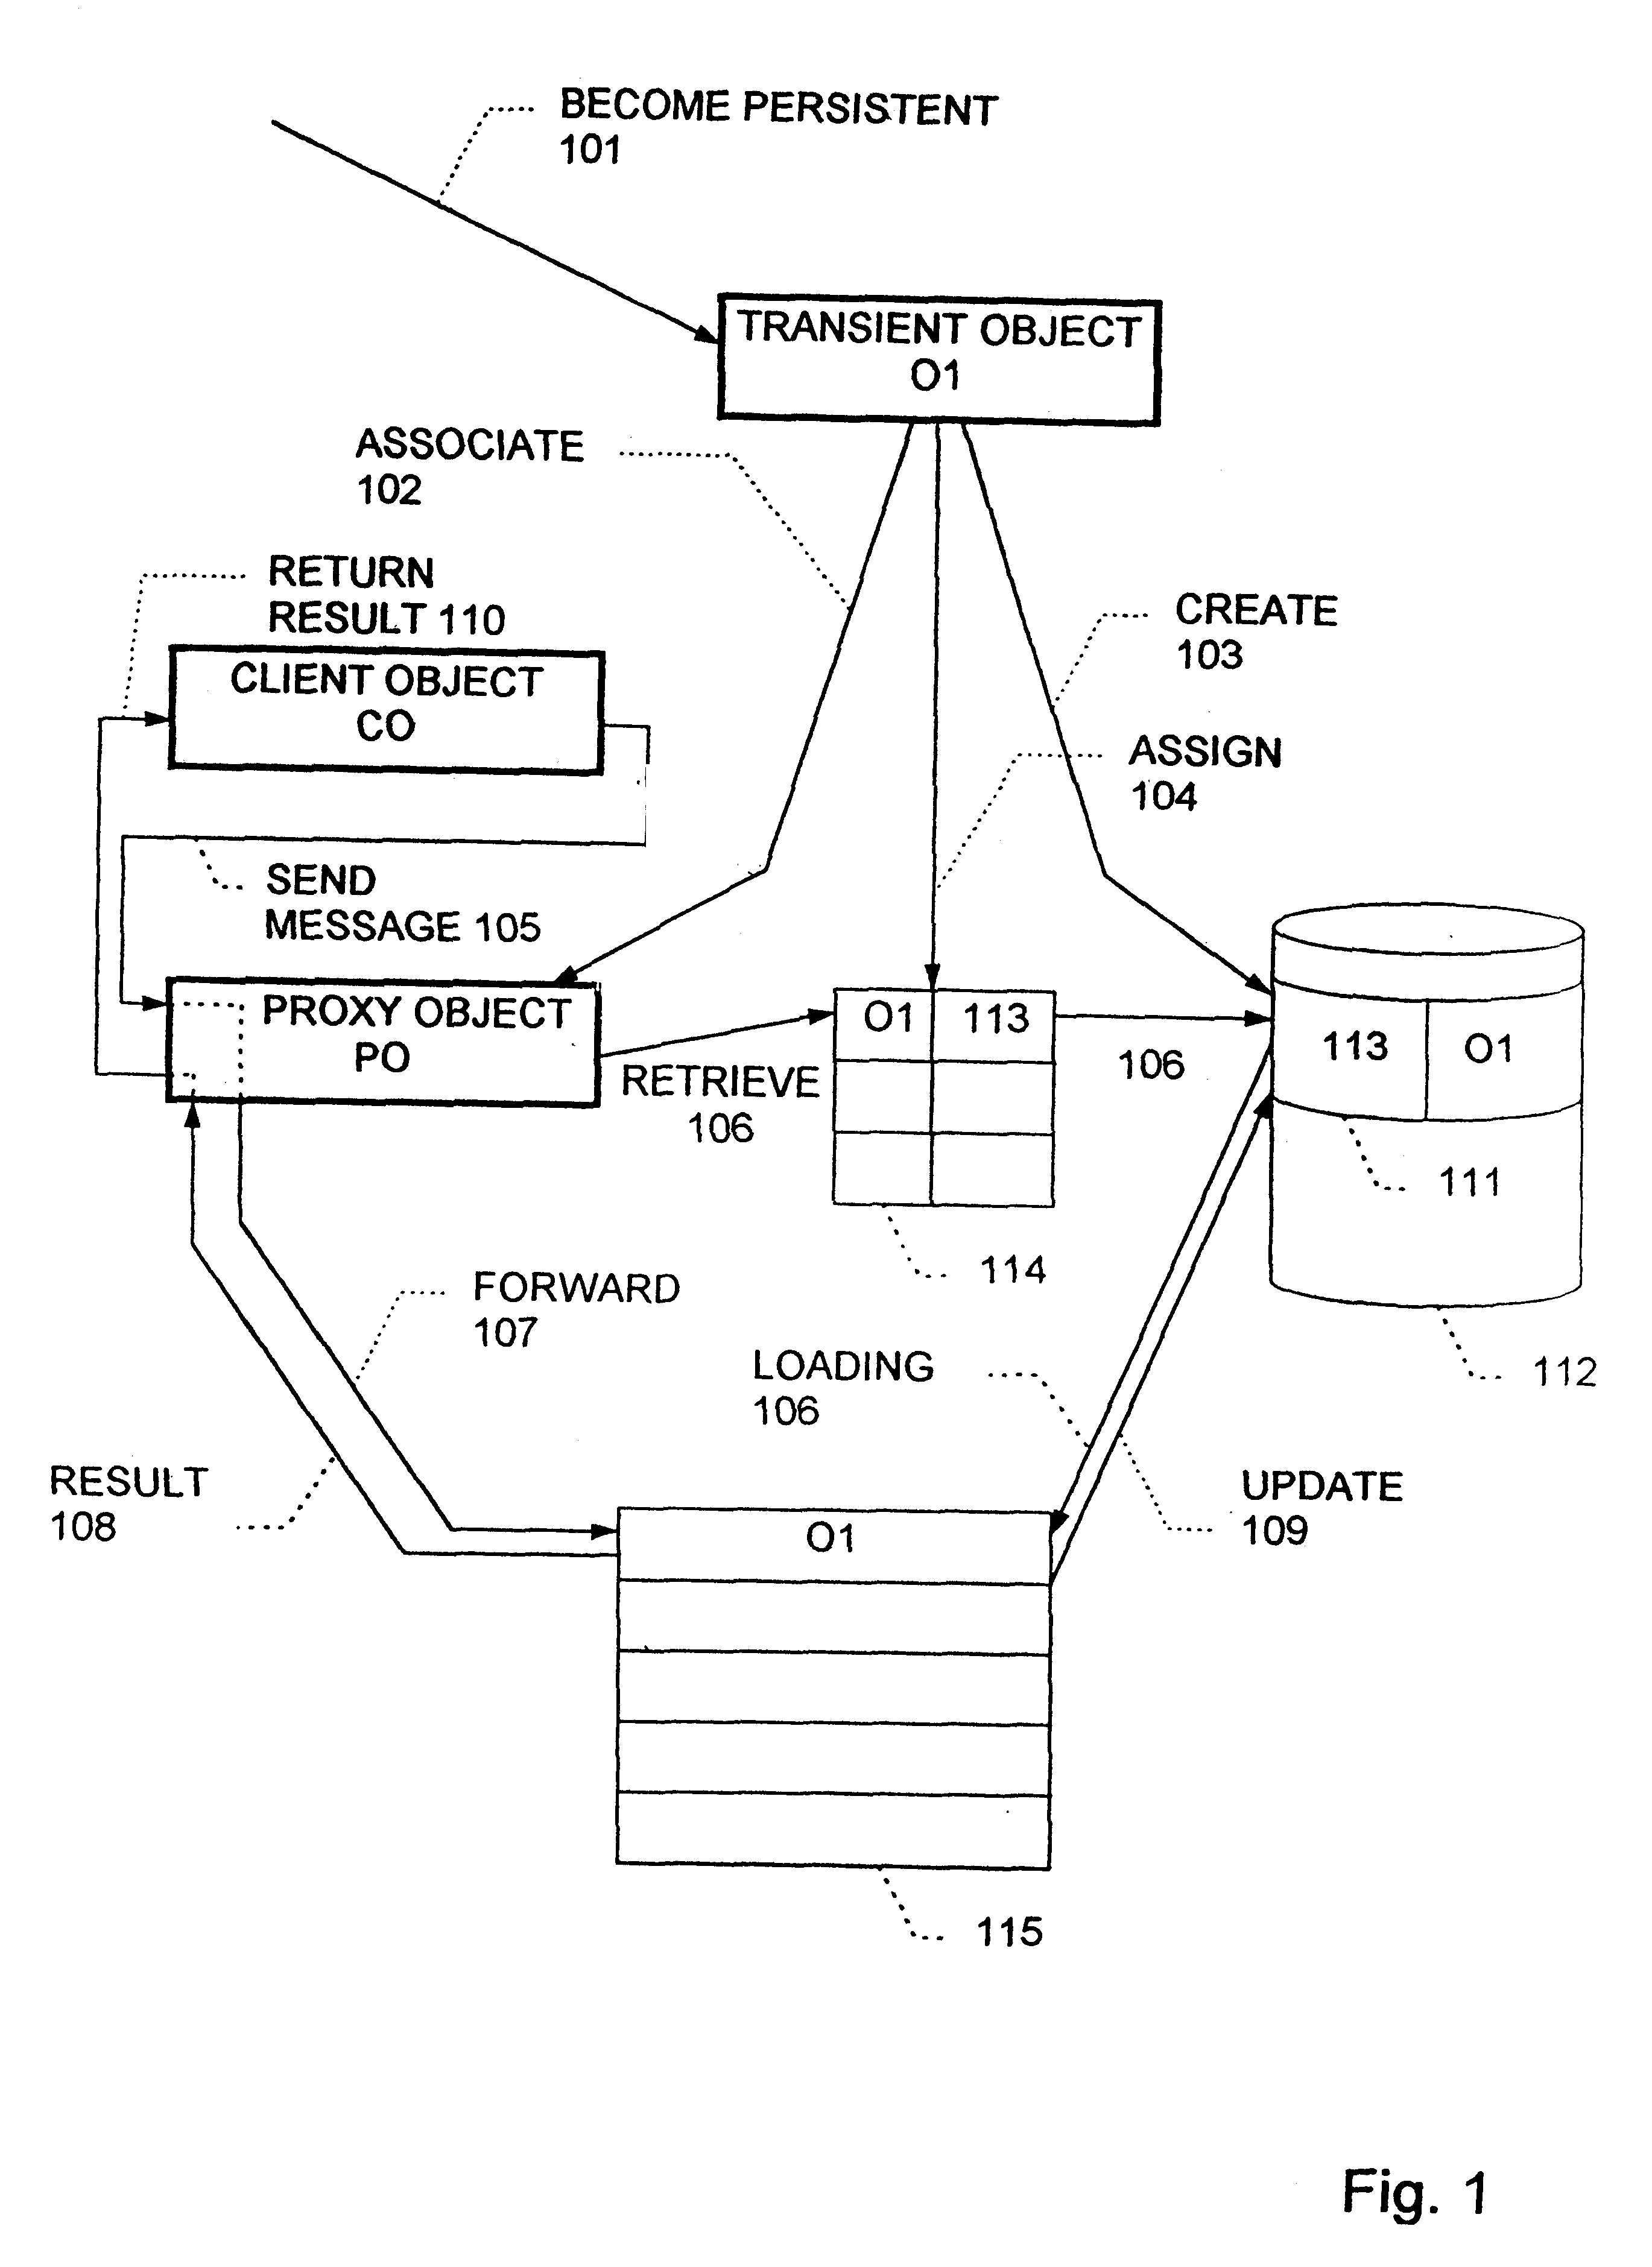 Method of providing persistency for transient objects in object oriented technology